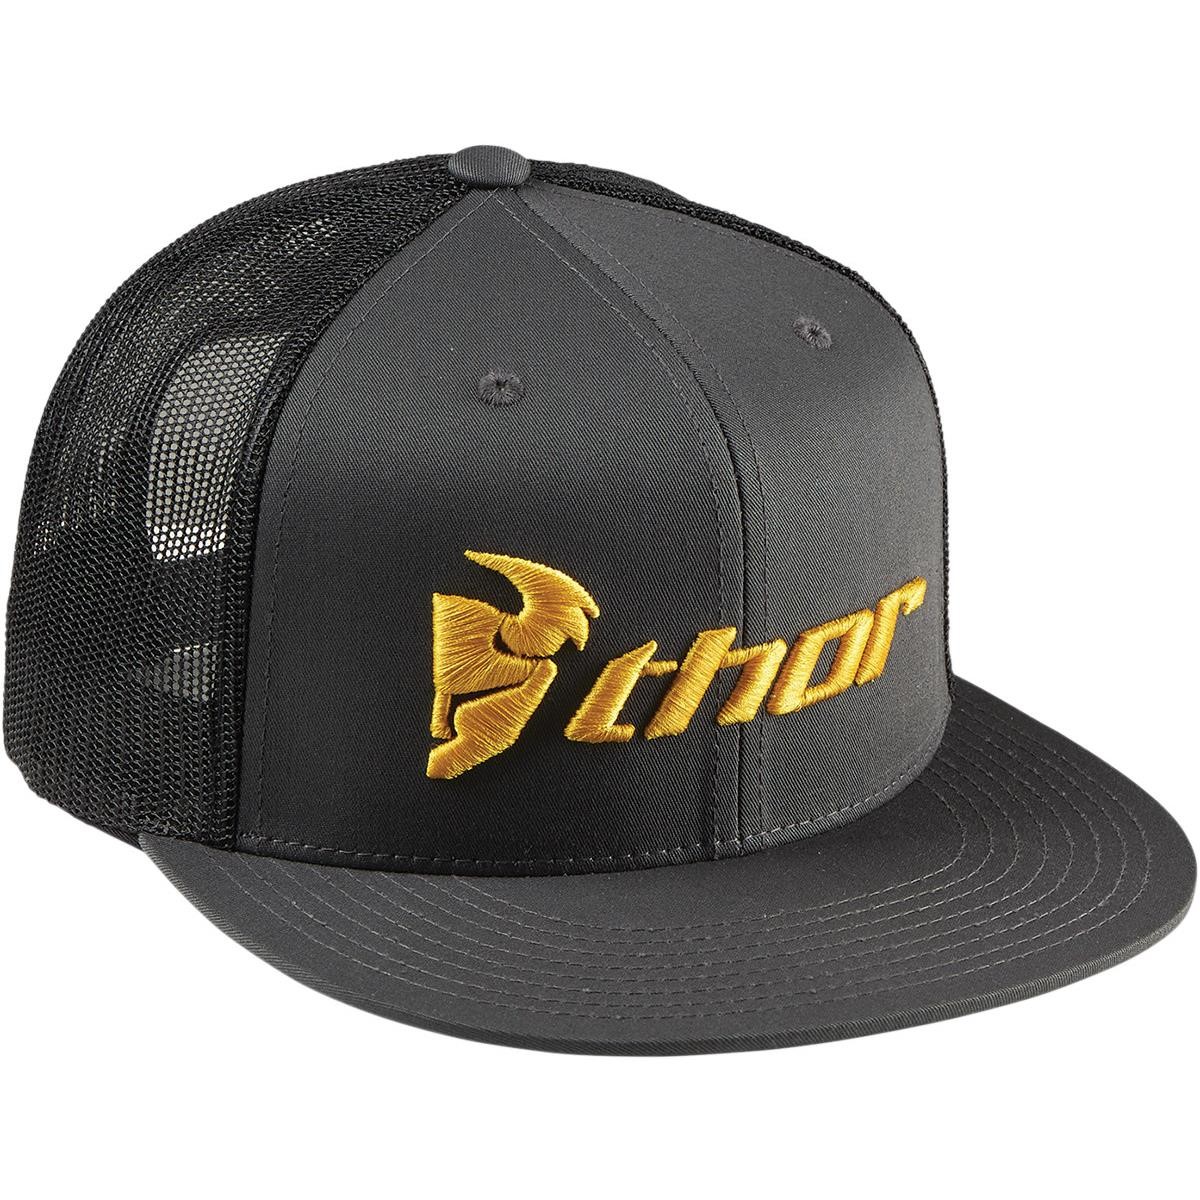 Thor Casquette Snap Back Trucker Charcoal/Yellow